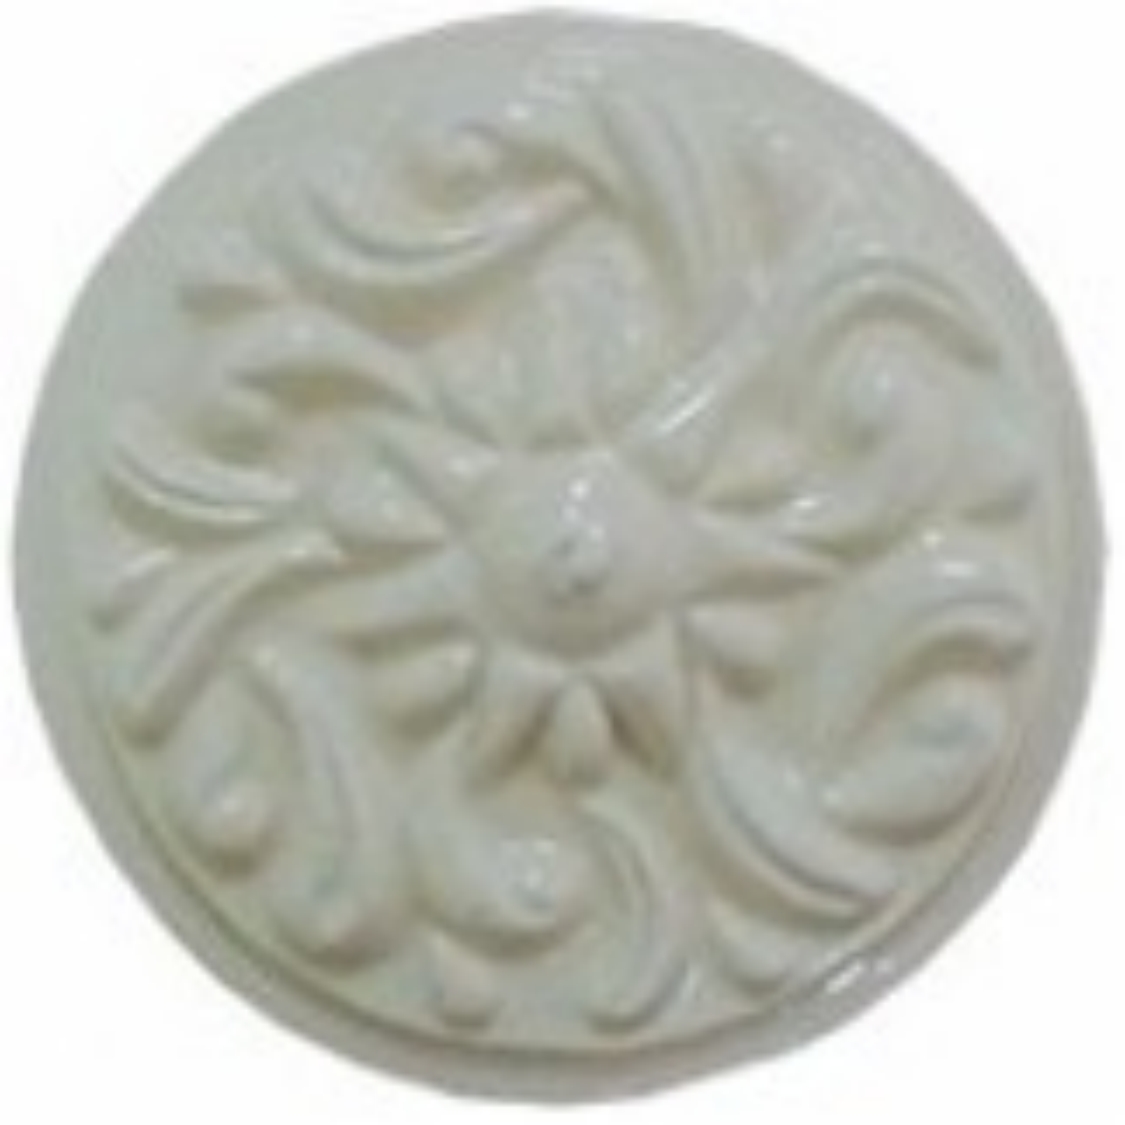 handmad circle ceramic tile with a high relief circular design and a one color glaze